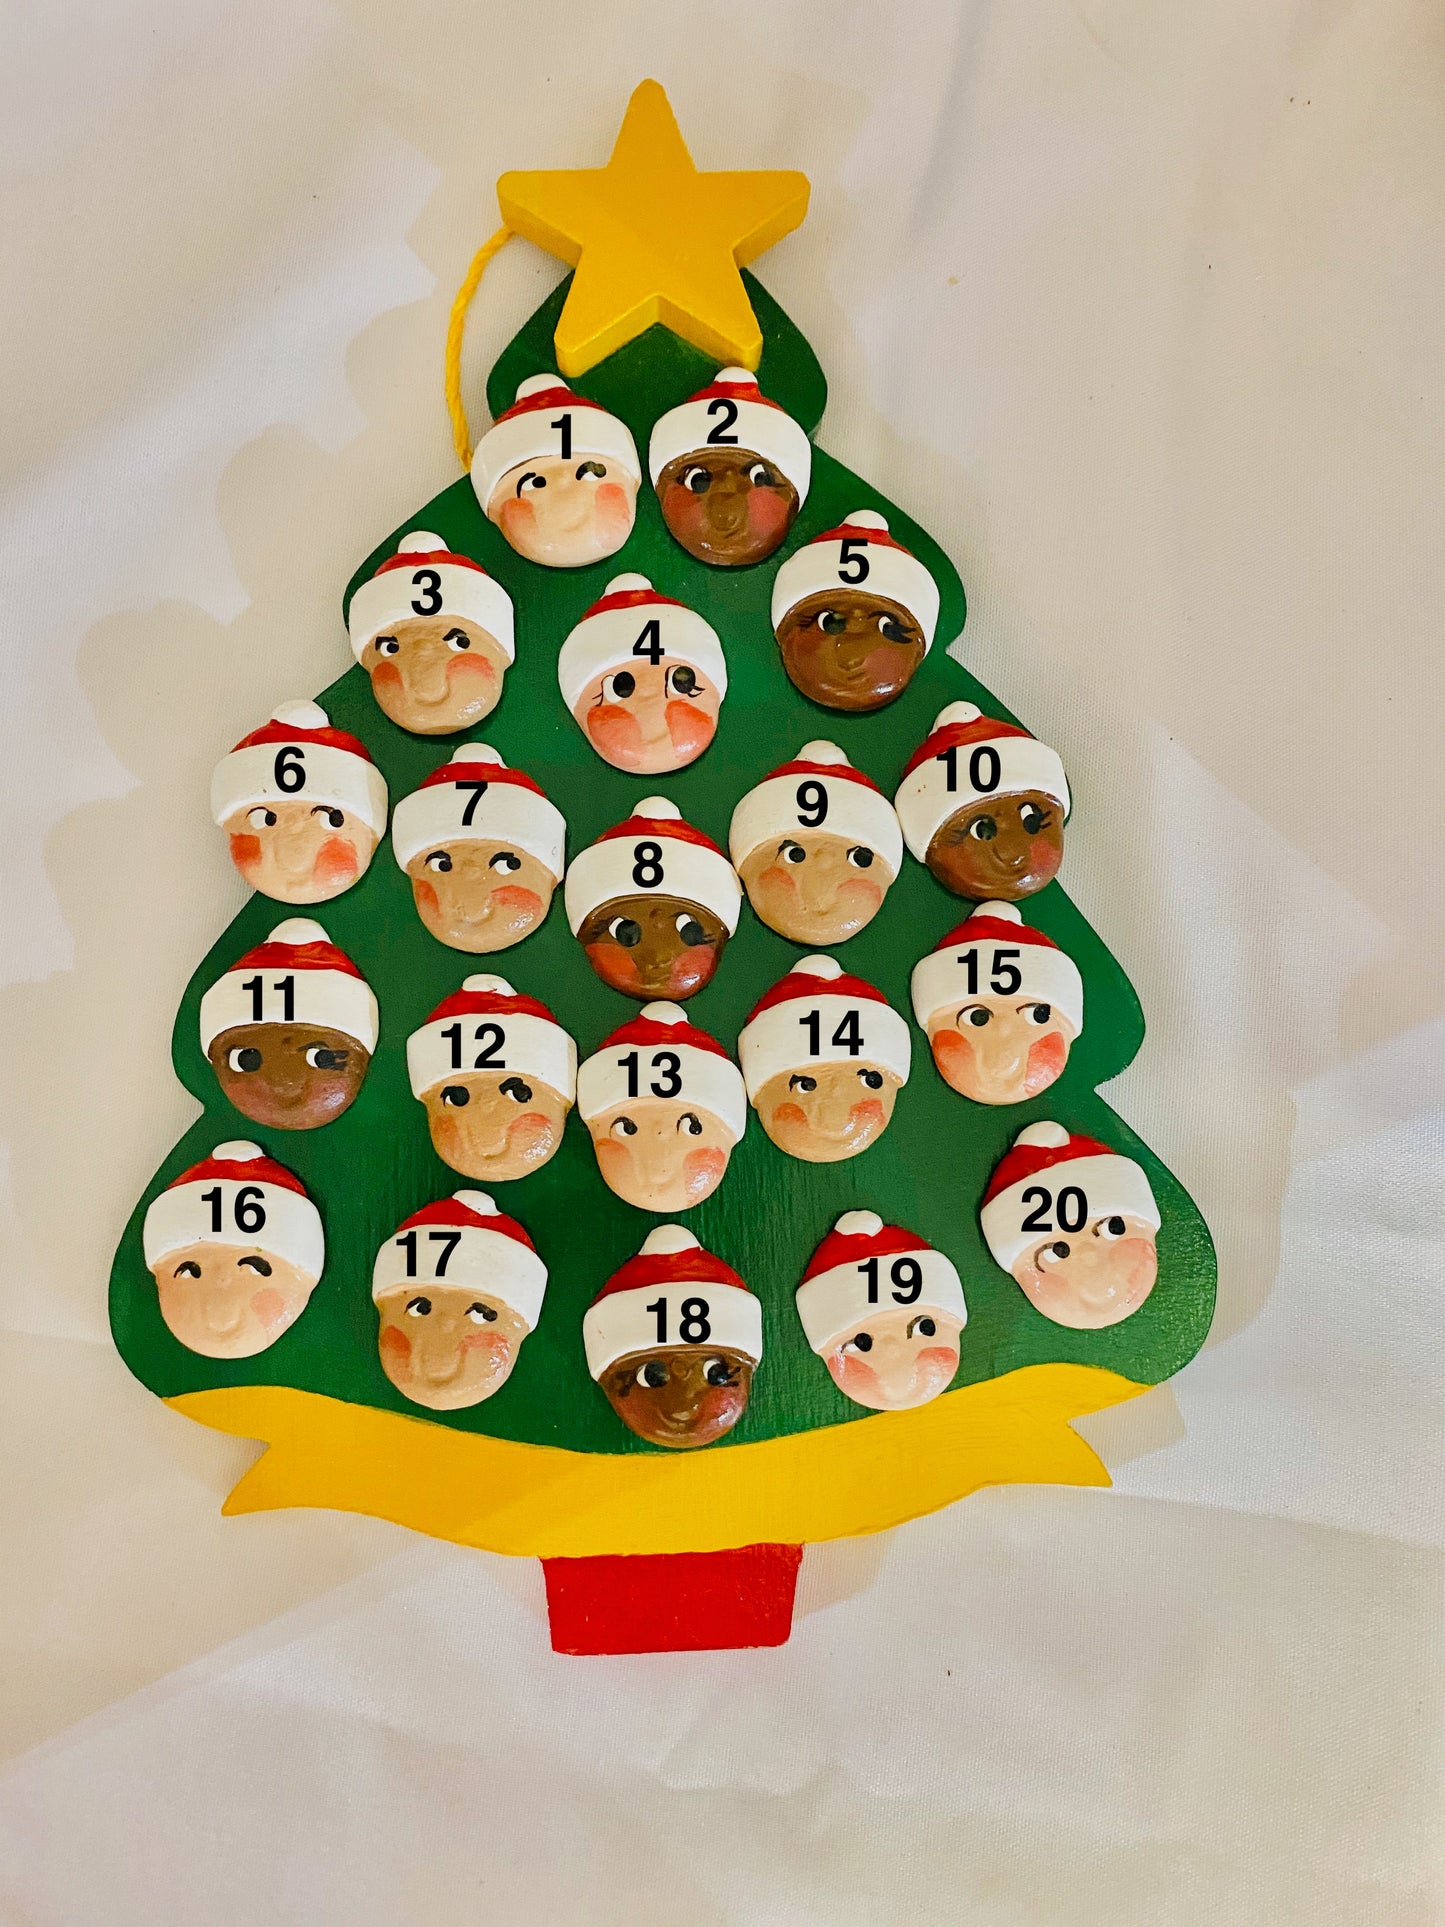 Personalized Ornament 20 Santa Faces on a Christmas Tree  7.5" x 6"